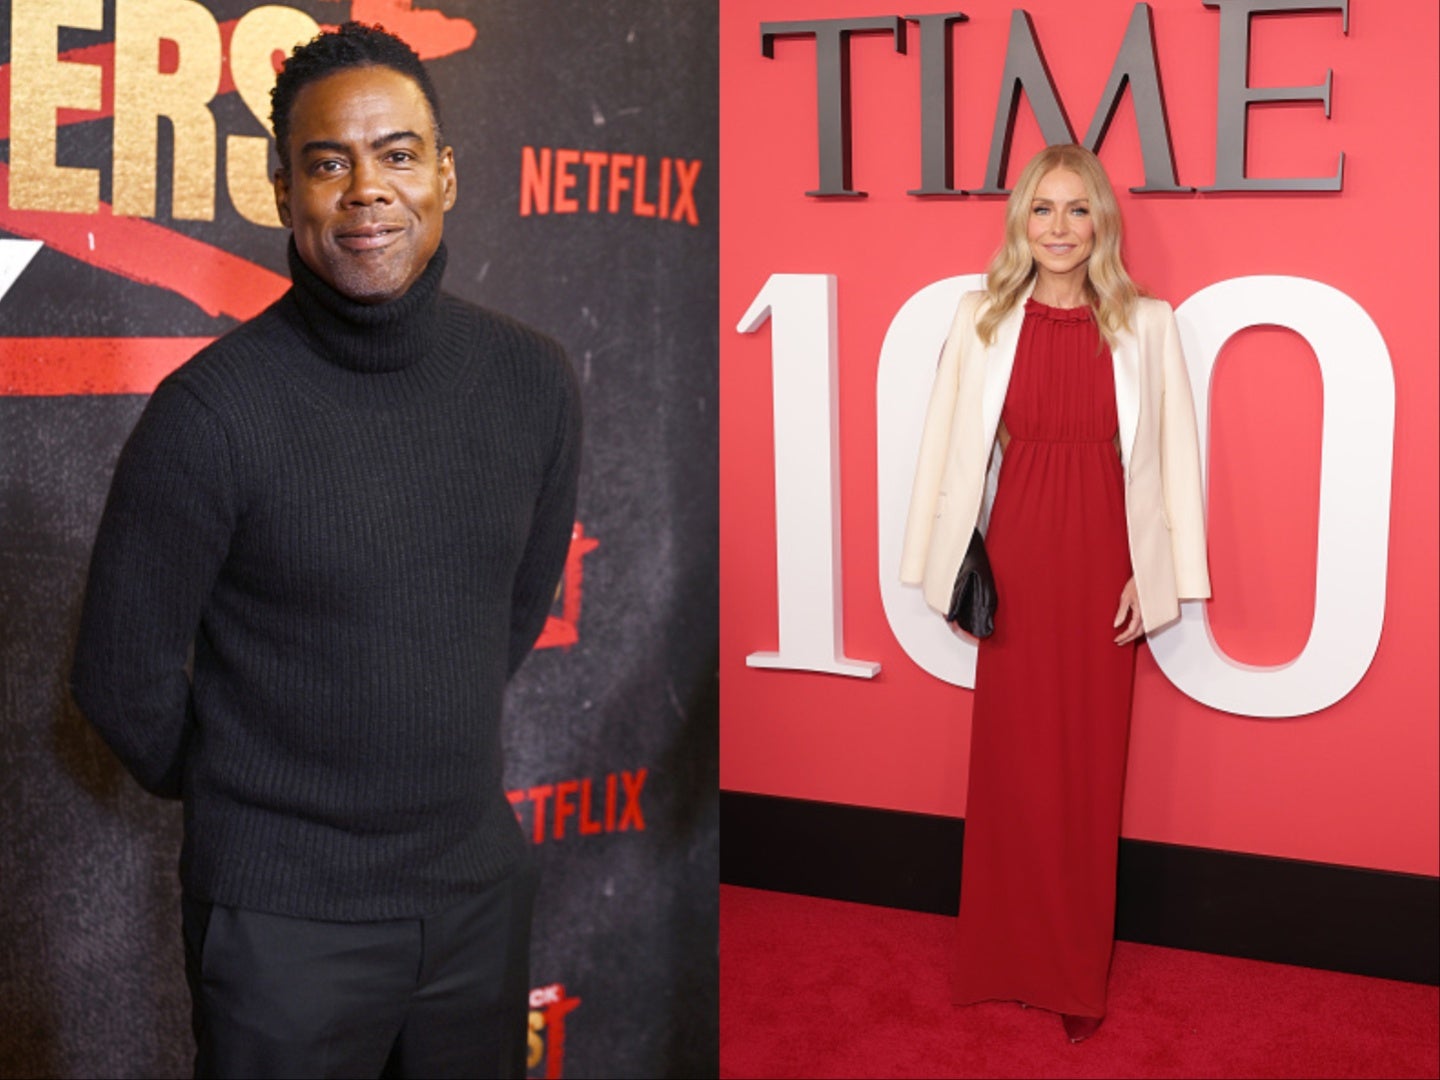 Chris Rock asked Kelly Ripa for permission to name his daughter